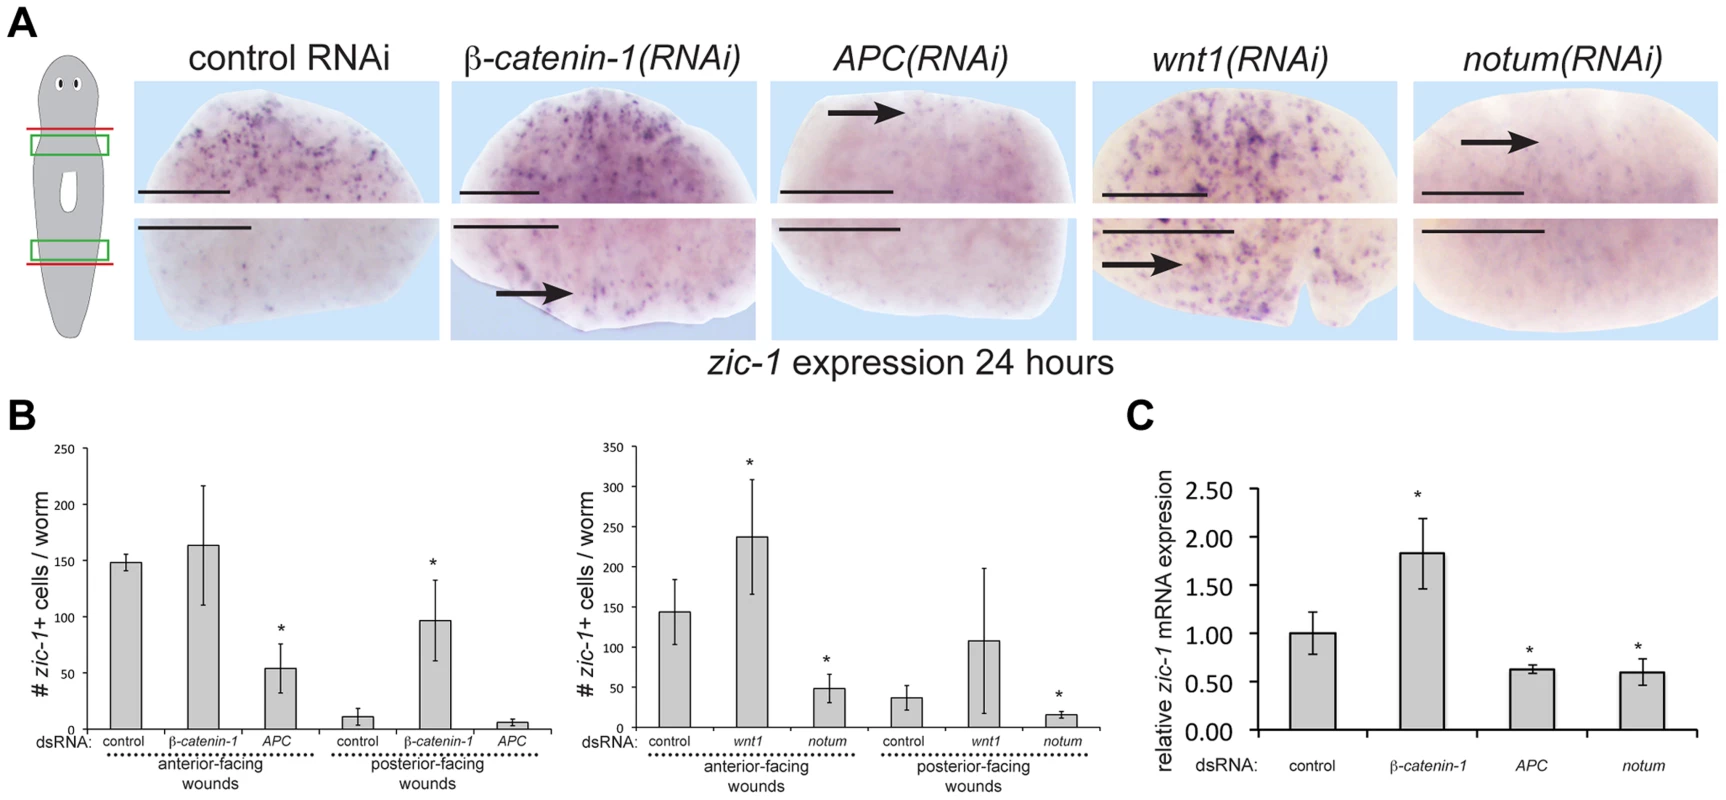 Polarized expression of <i>zic-1</i> early after injury is controlled by <i>notum</i>'s inhibition of canonical Wnt signaling.